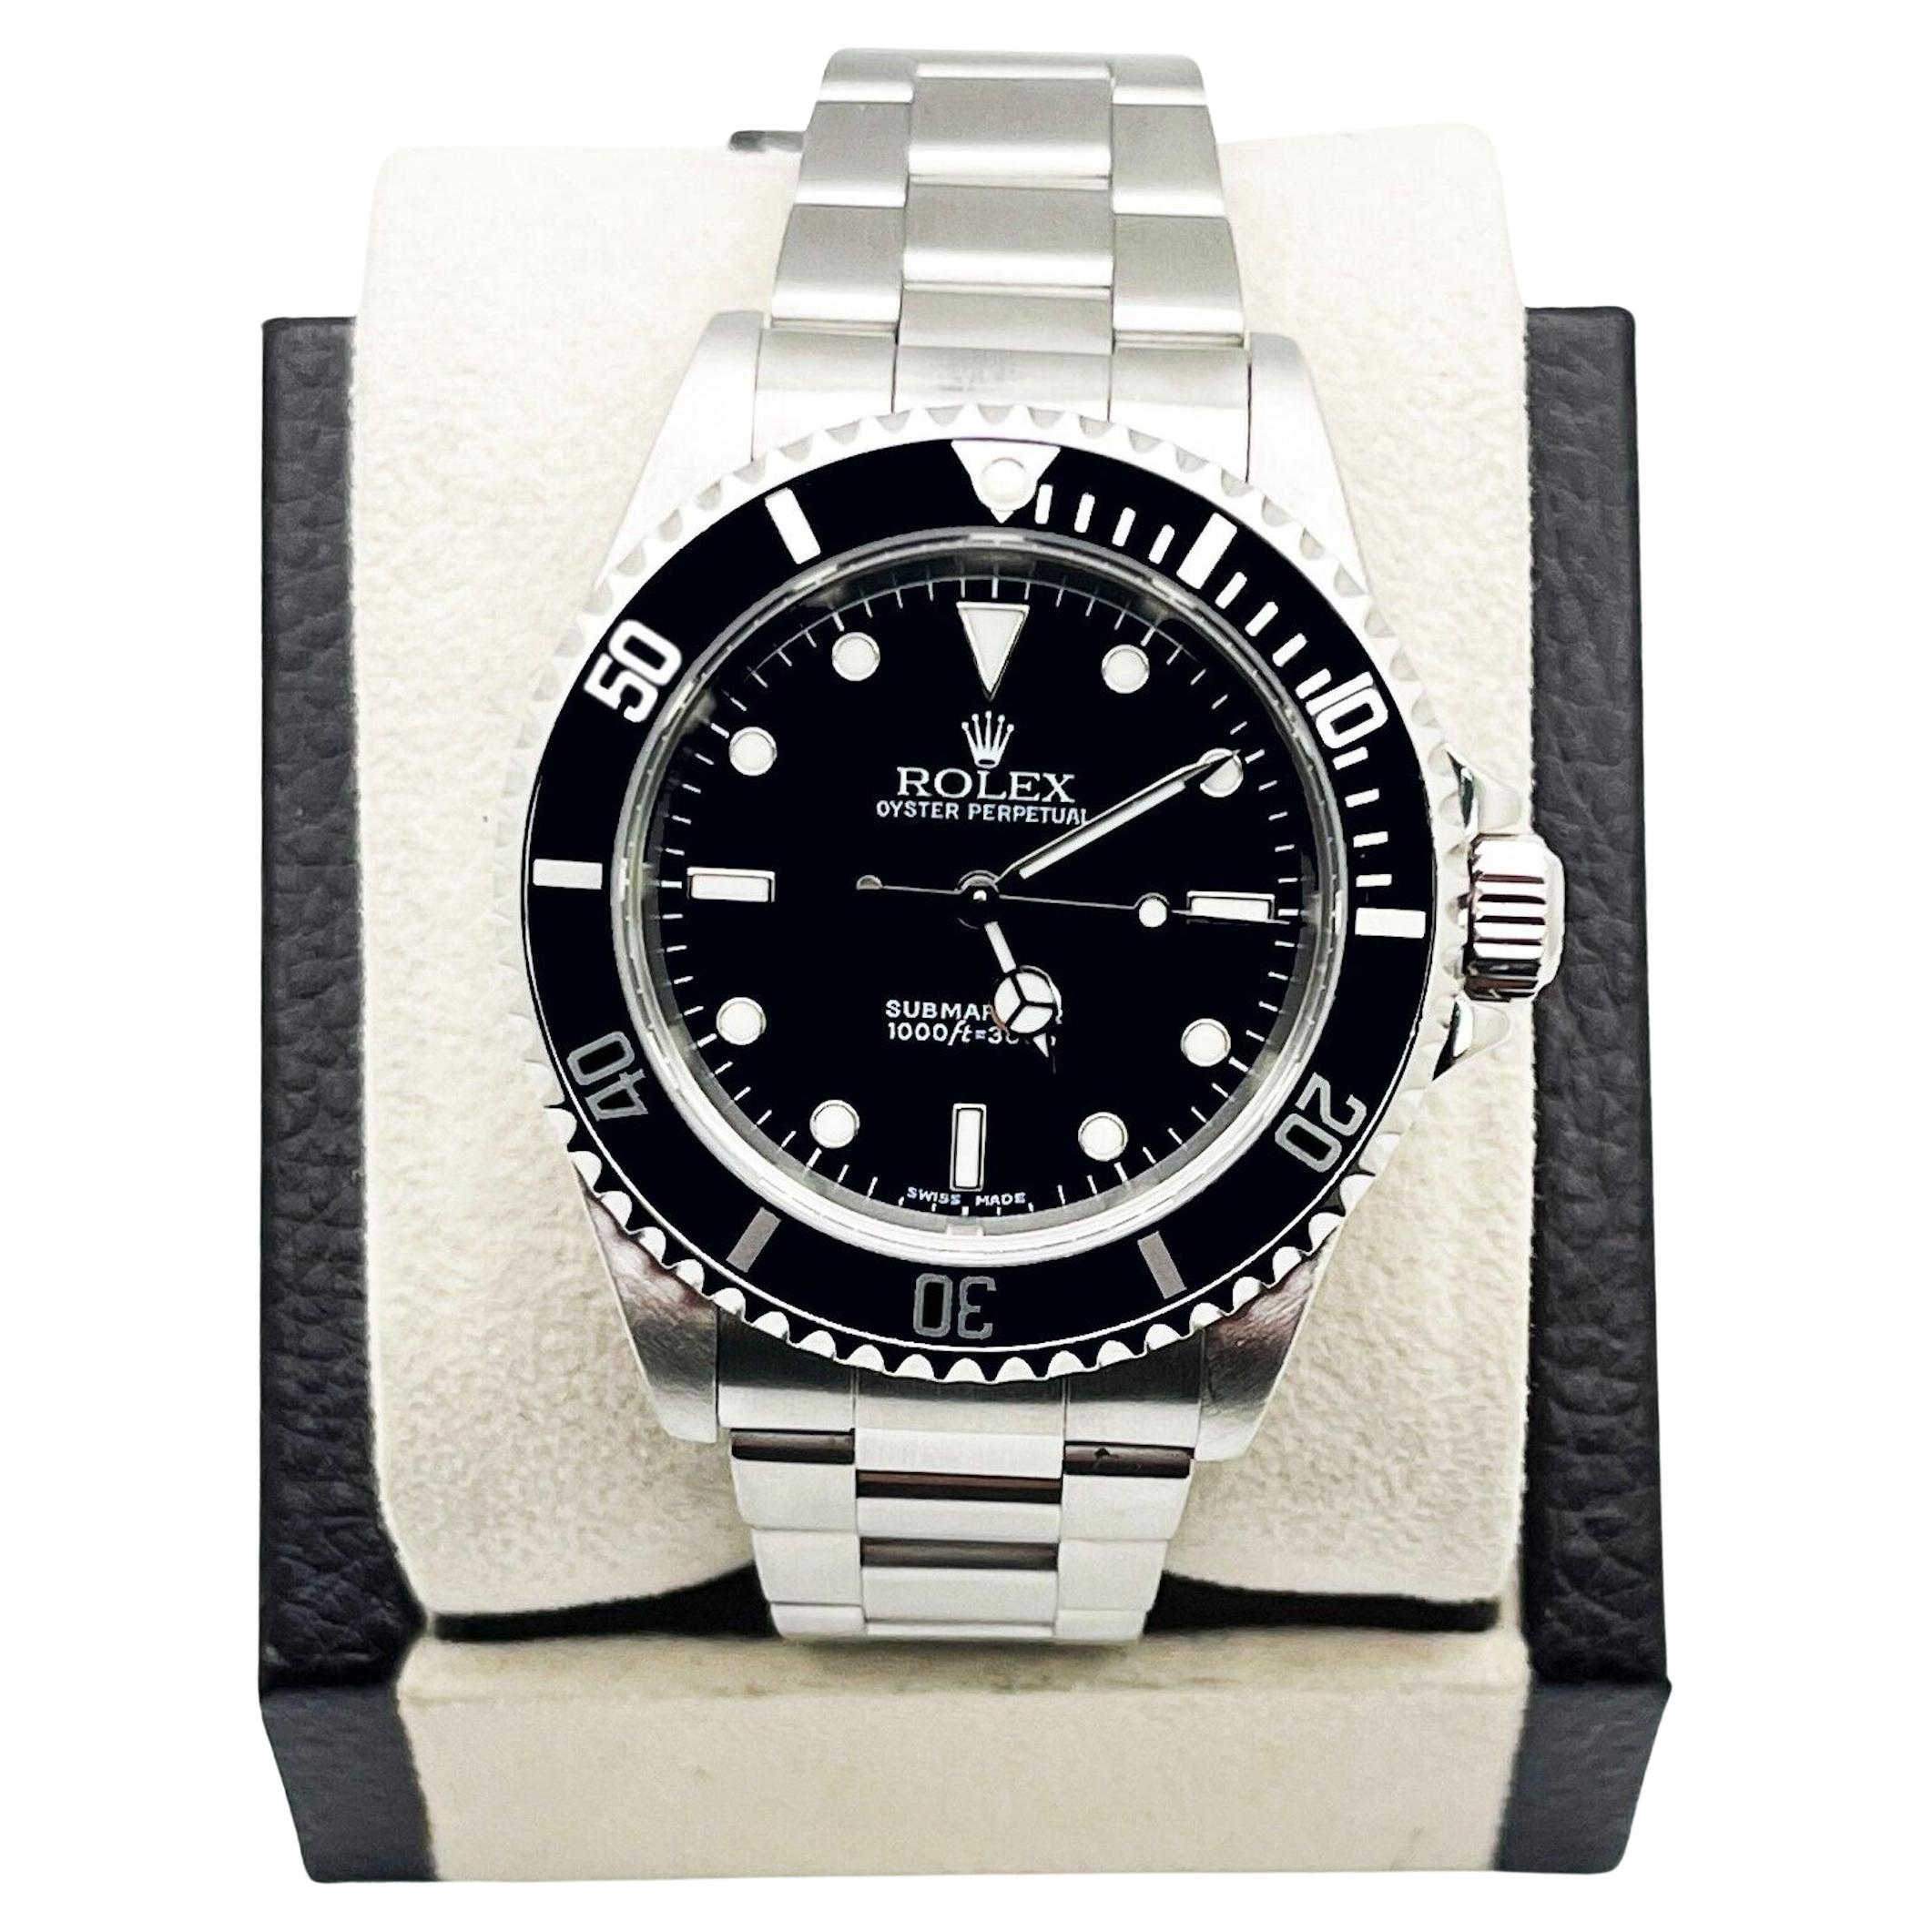 Rolex Submariner 14060 Black Dial Stainless Steel Box Paper 2005 For Sale